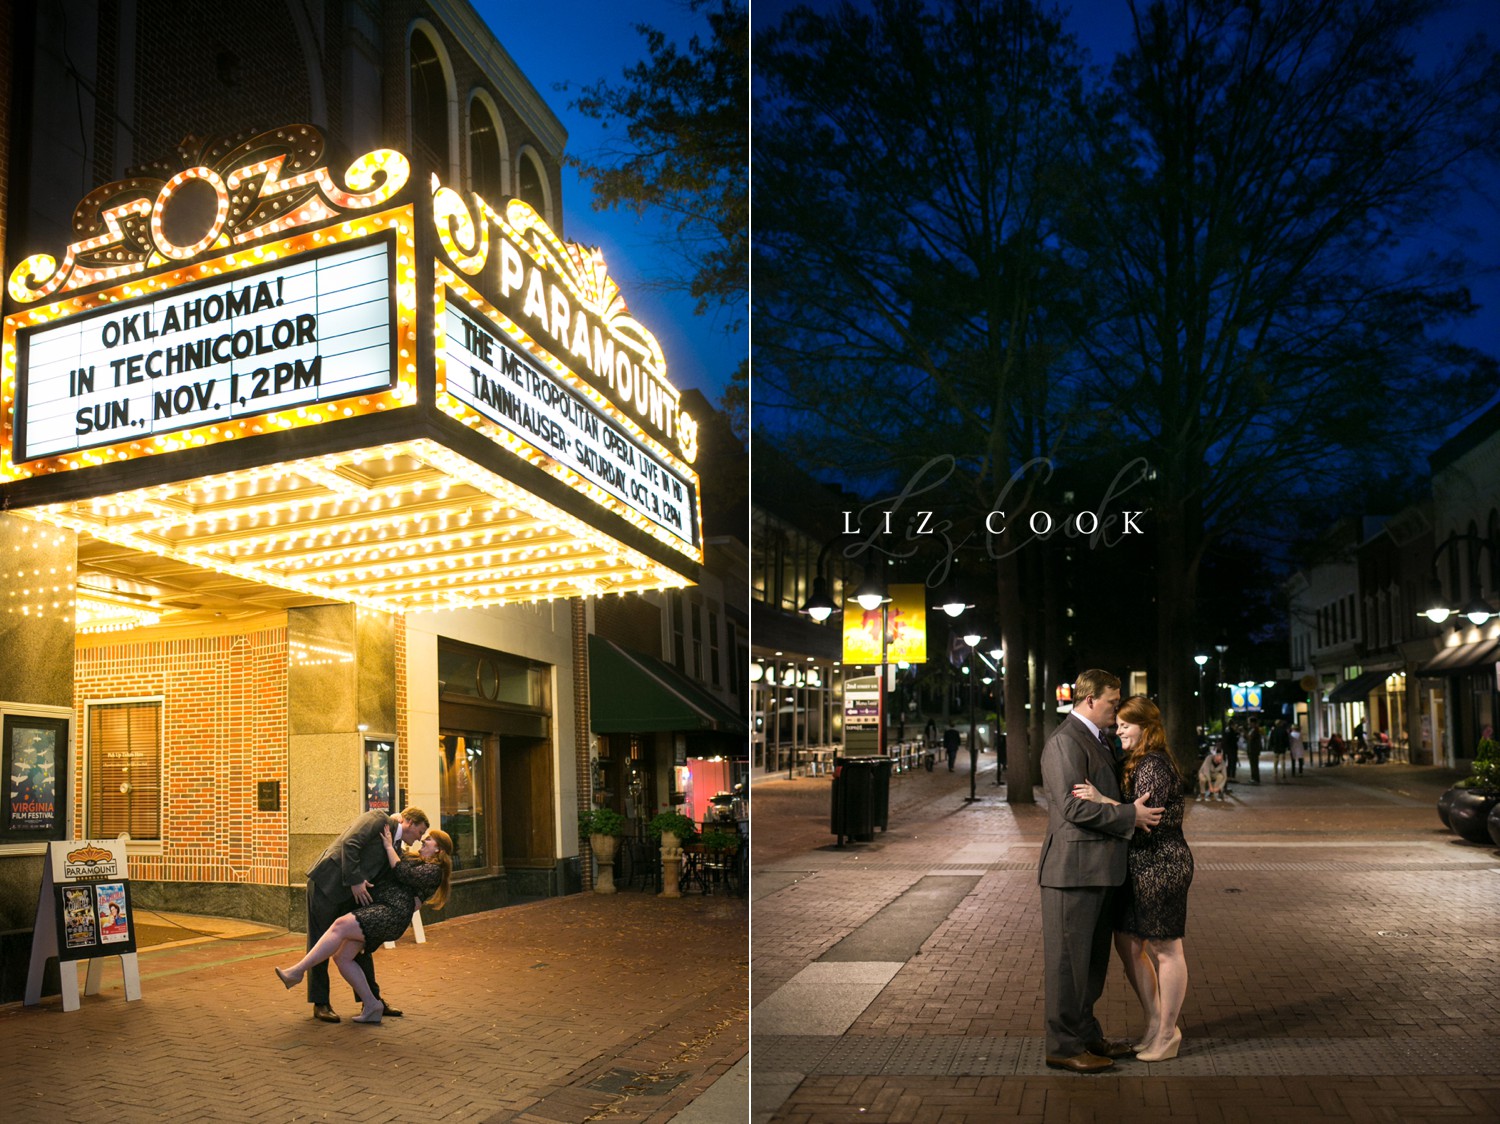 Engagement Portraits on the Downtown Mall in Charlottesville, Virginia